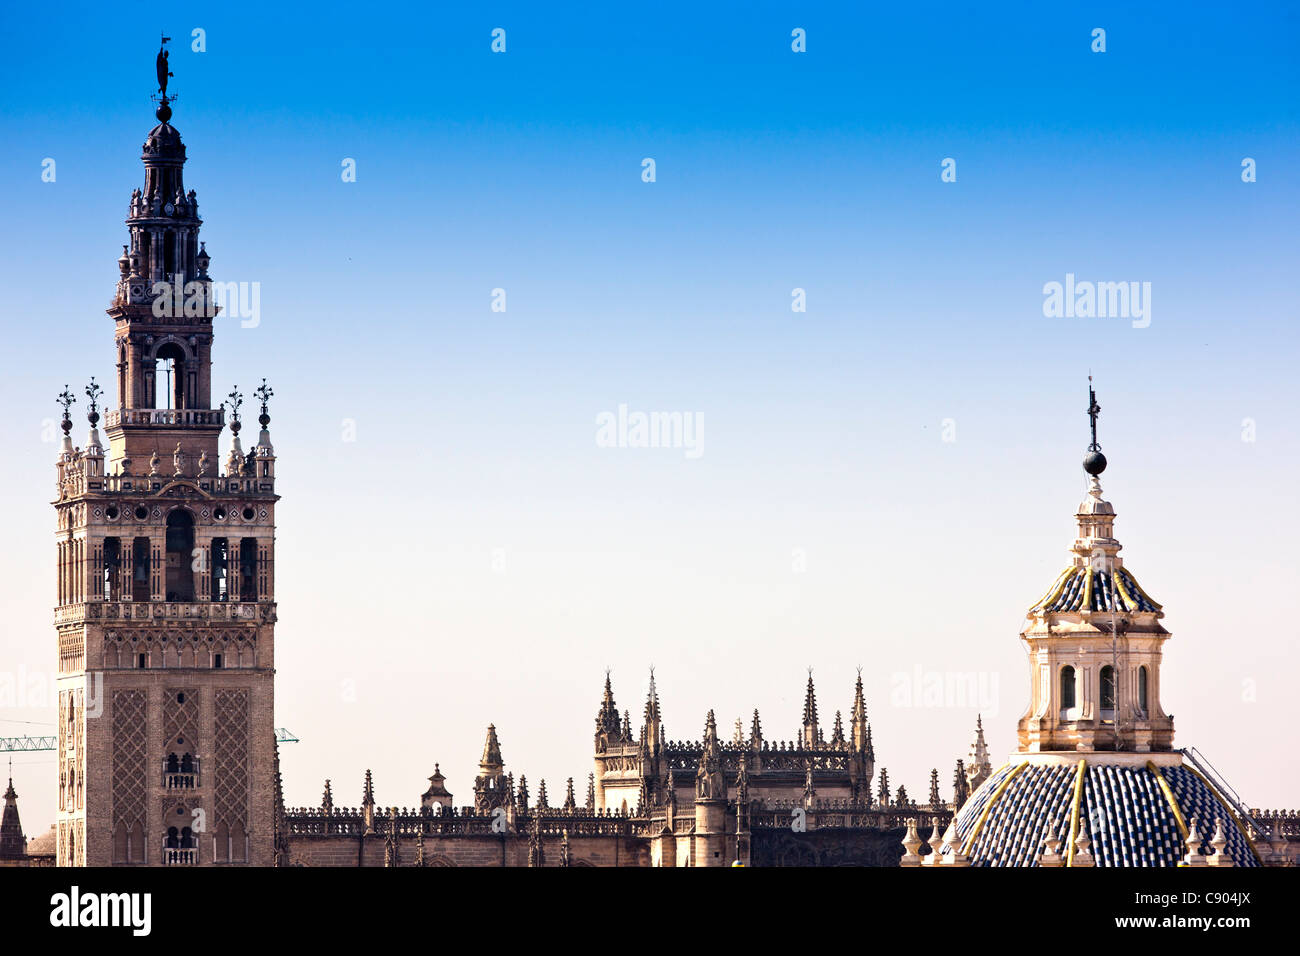 The Giralda tower (left) and El Salvador dome (right) as seen from the top of Metropol Parasol, Seville, Spain Stock Photo